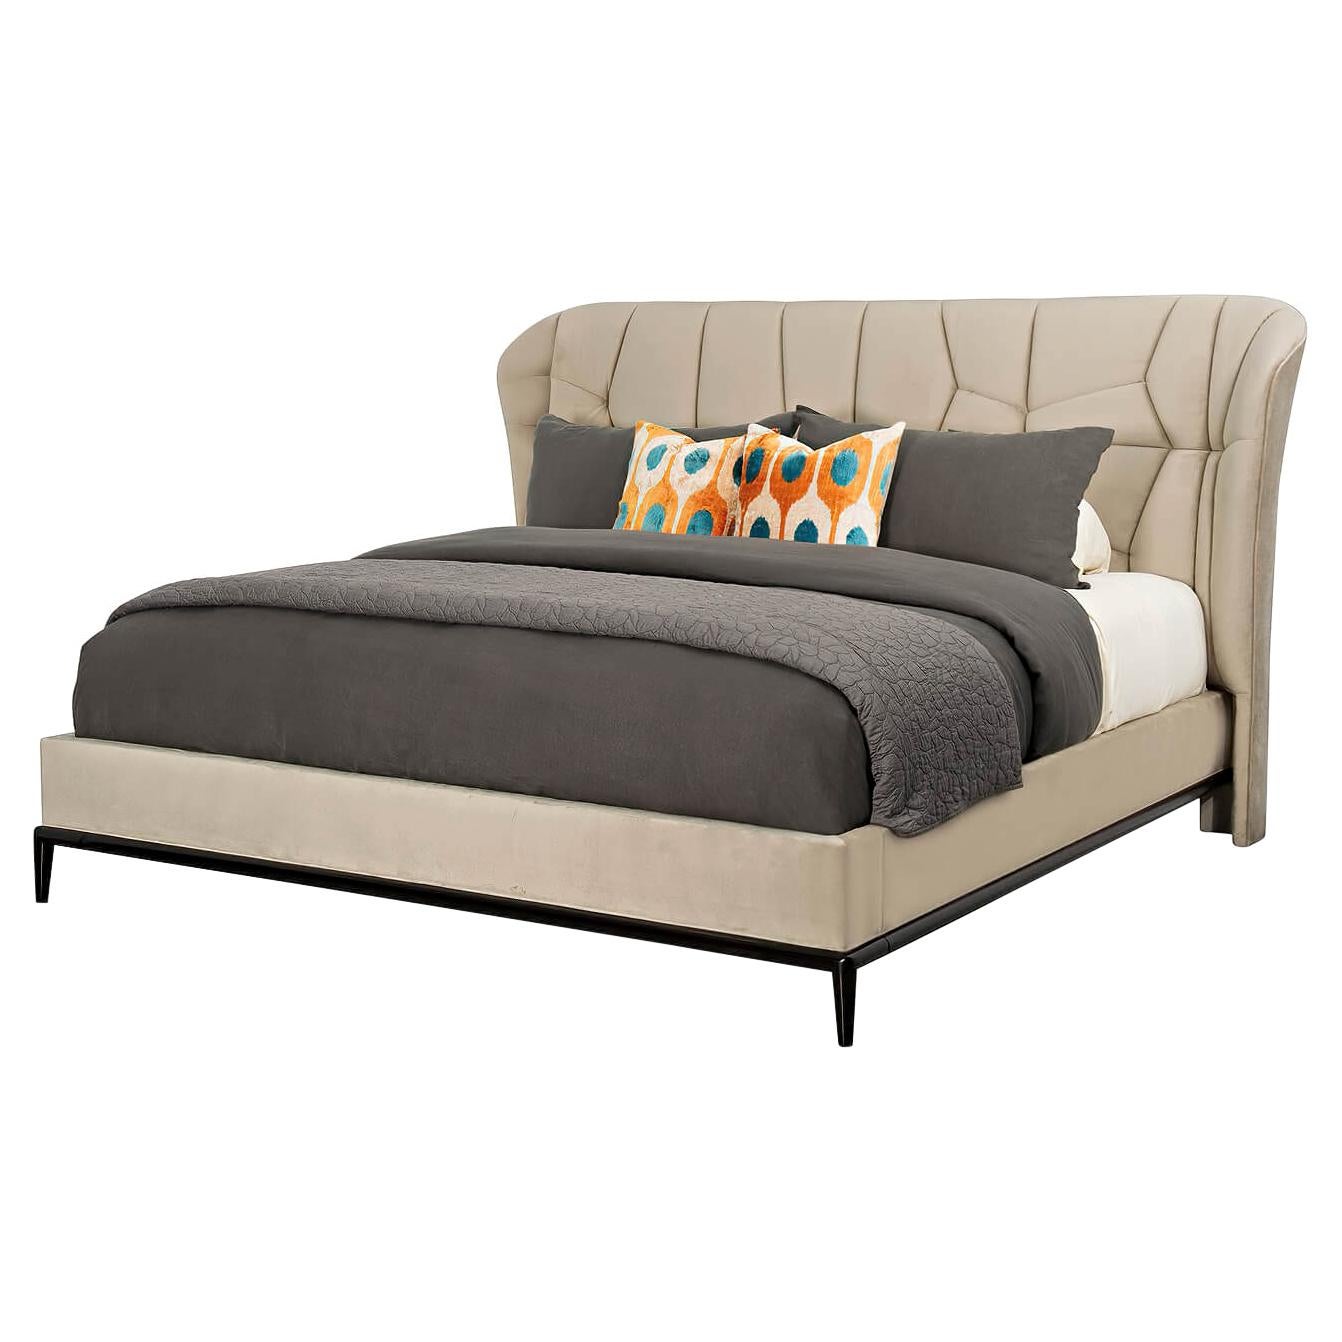 Modern Classic Upholstered Queen Bed